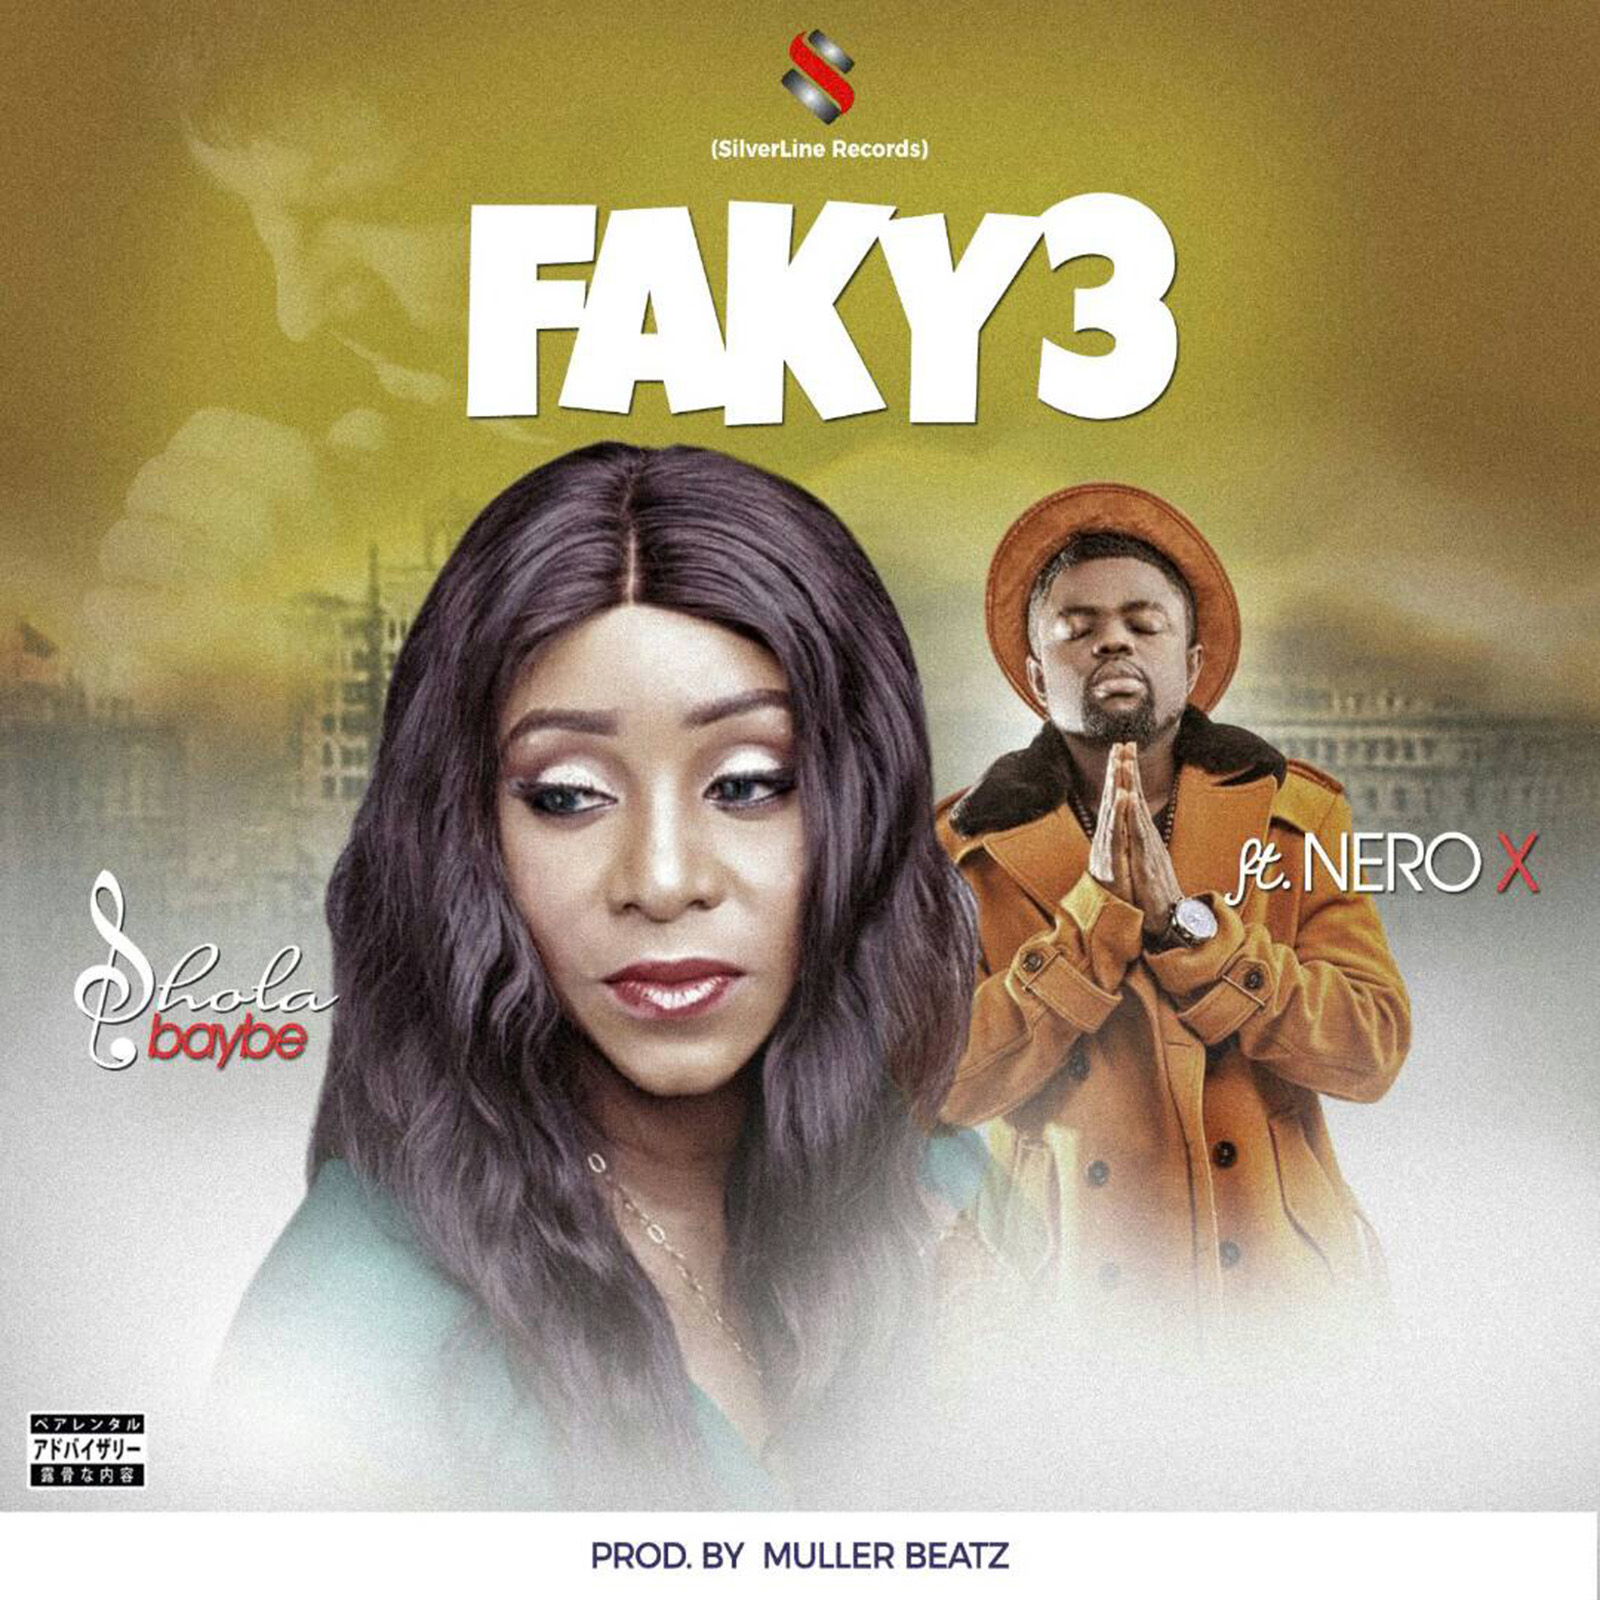 Faky3 by Shola Baybe feat. Nero X